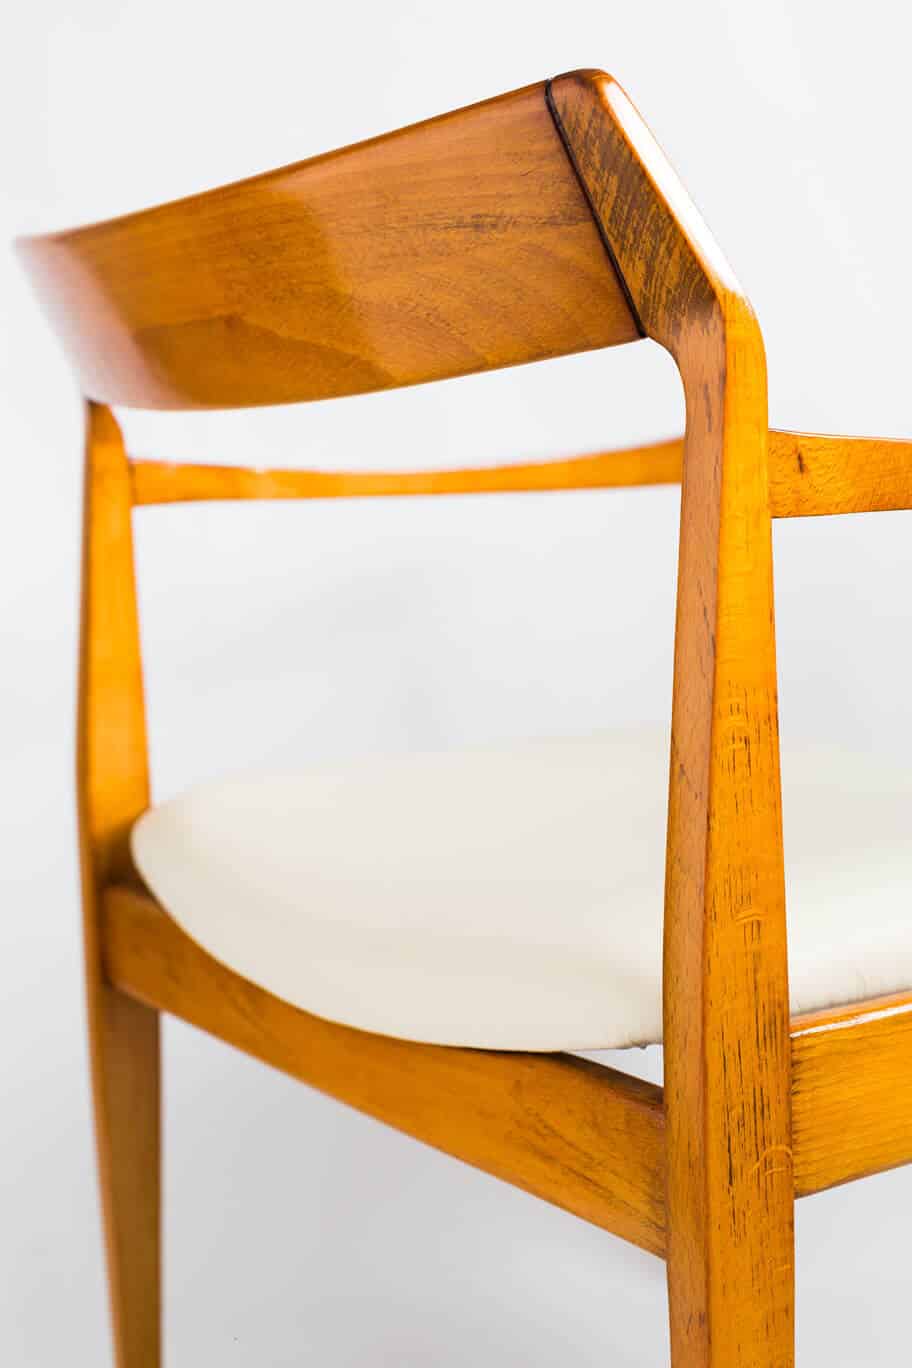 Armchair Type GFM-104 designed by E.Homa